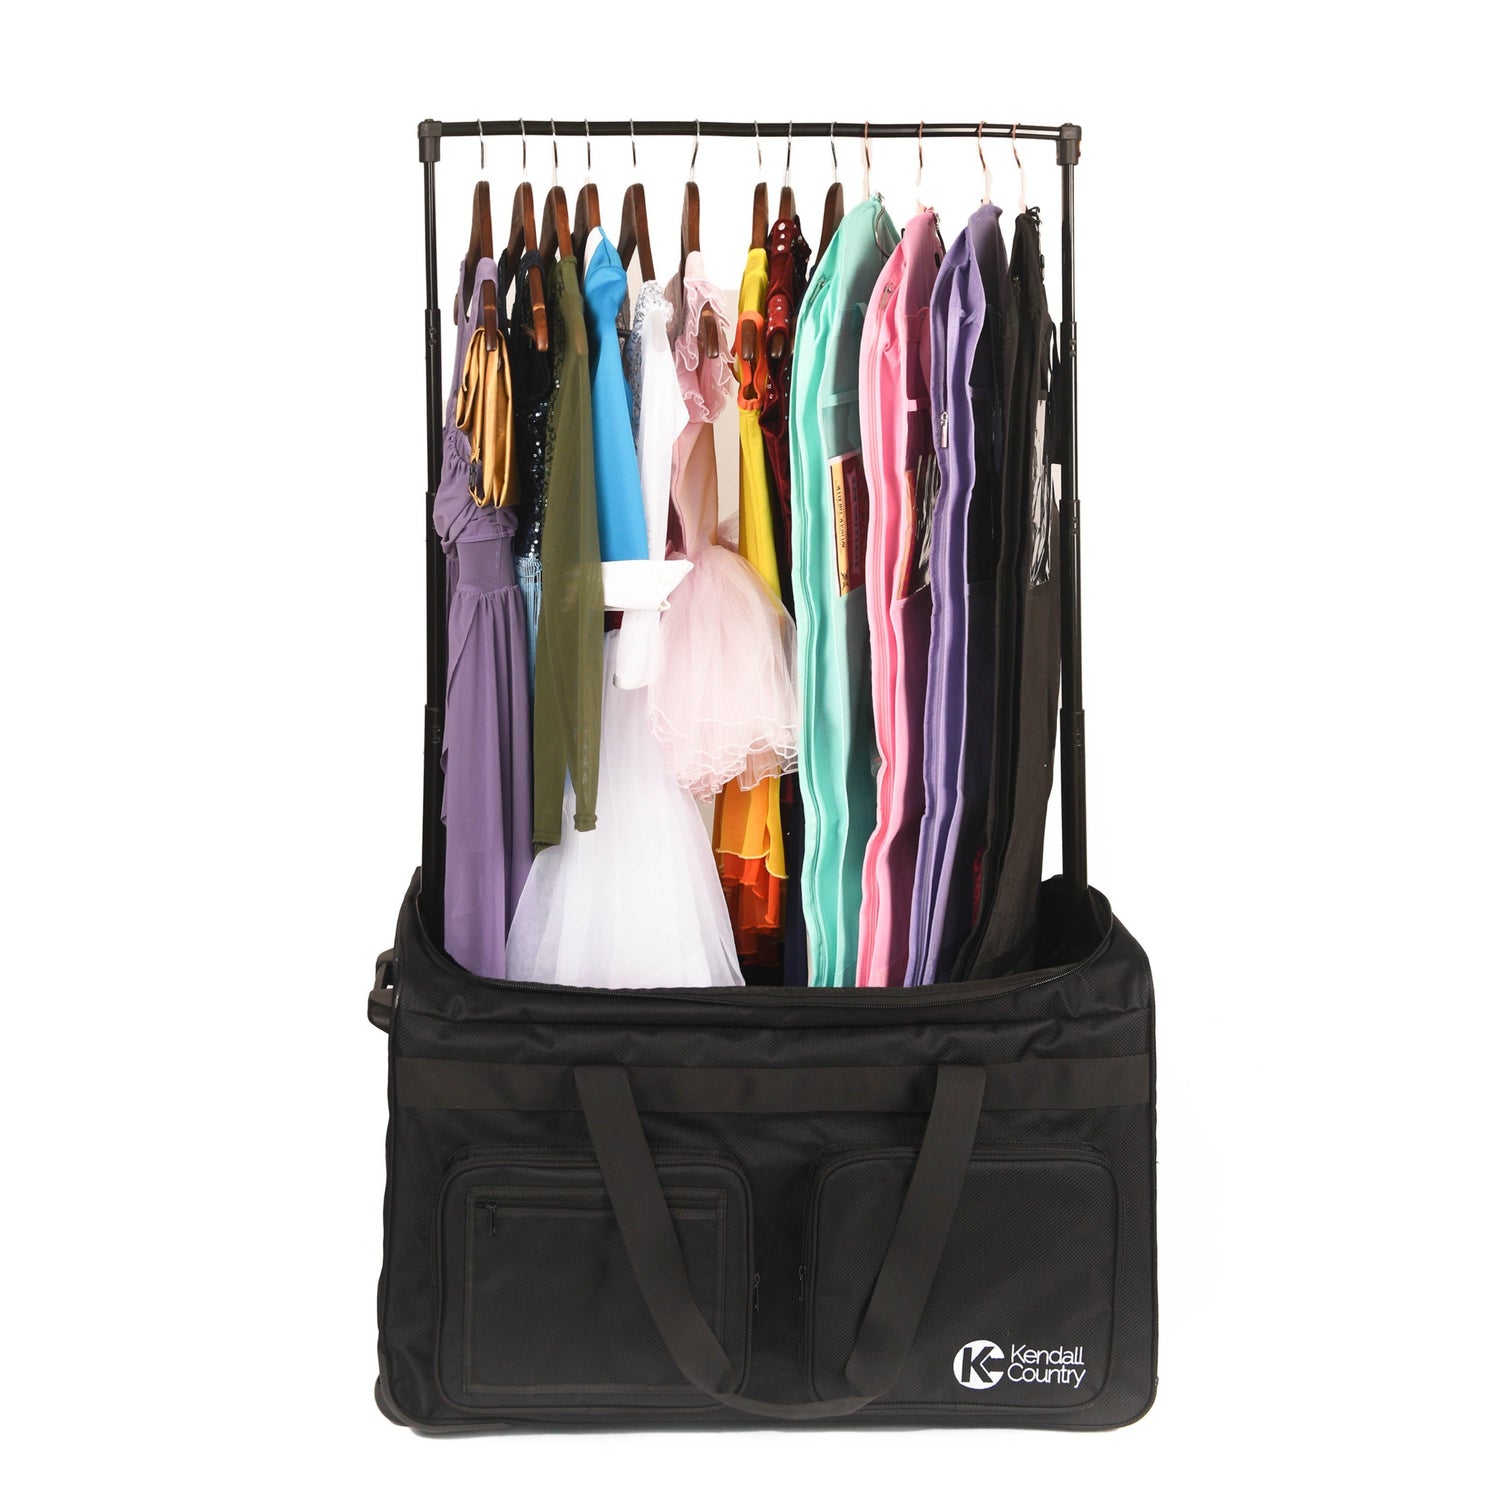 Kendall Country Garment Bag with Rack - Extra Large